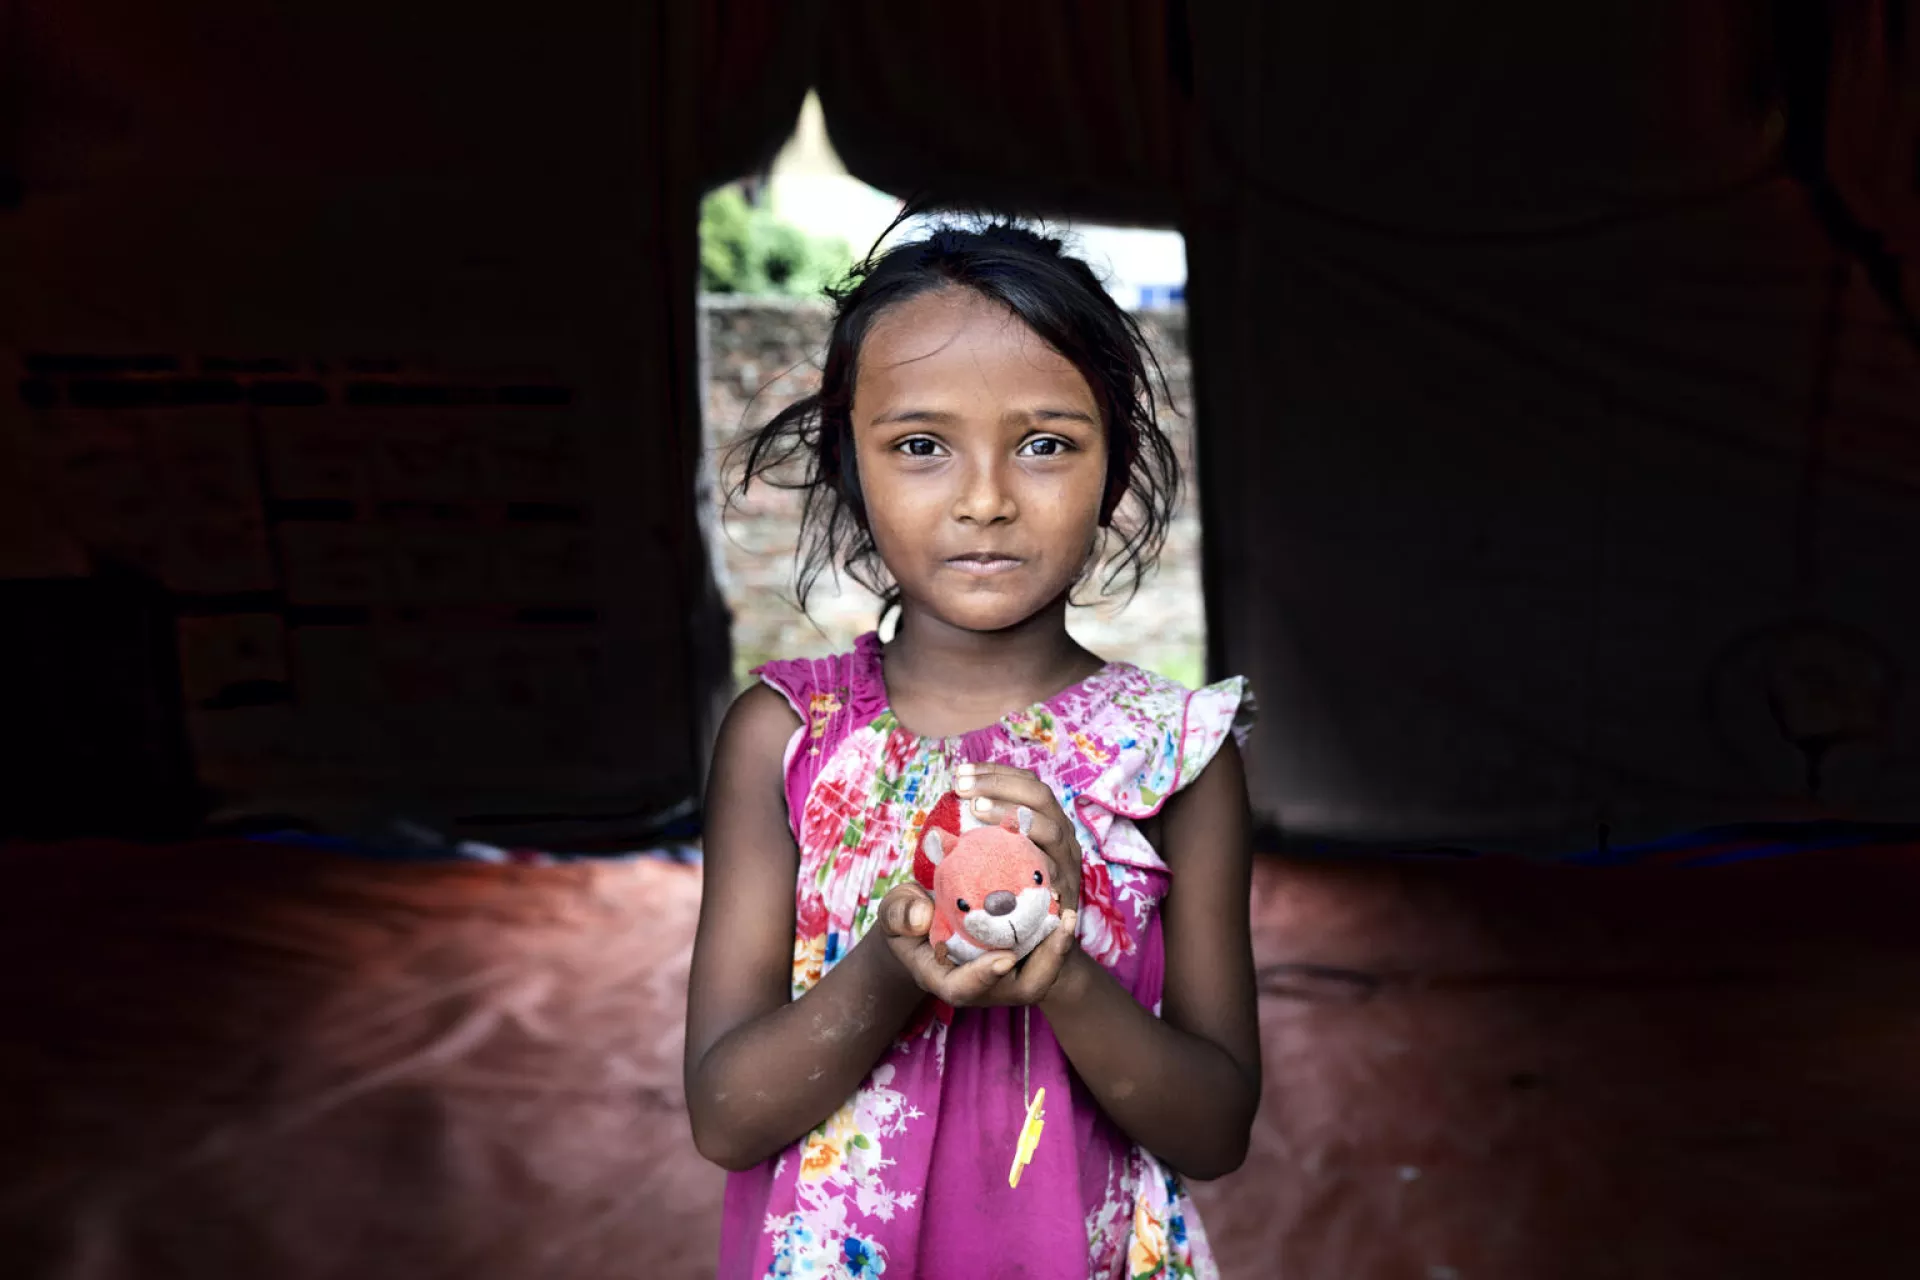 Meem (5) holds her toy while standing inside a child protection hub supported by UNICEF.